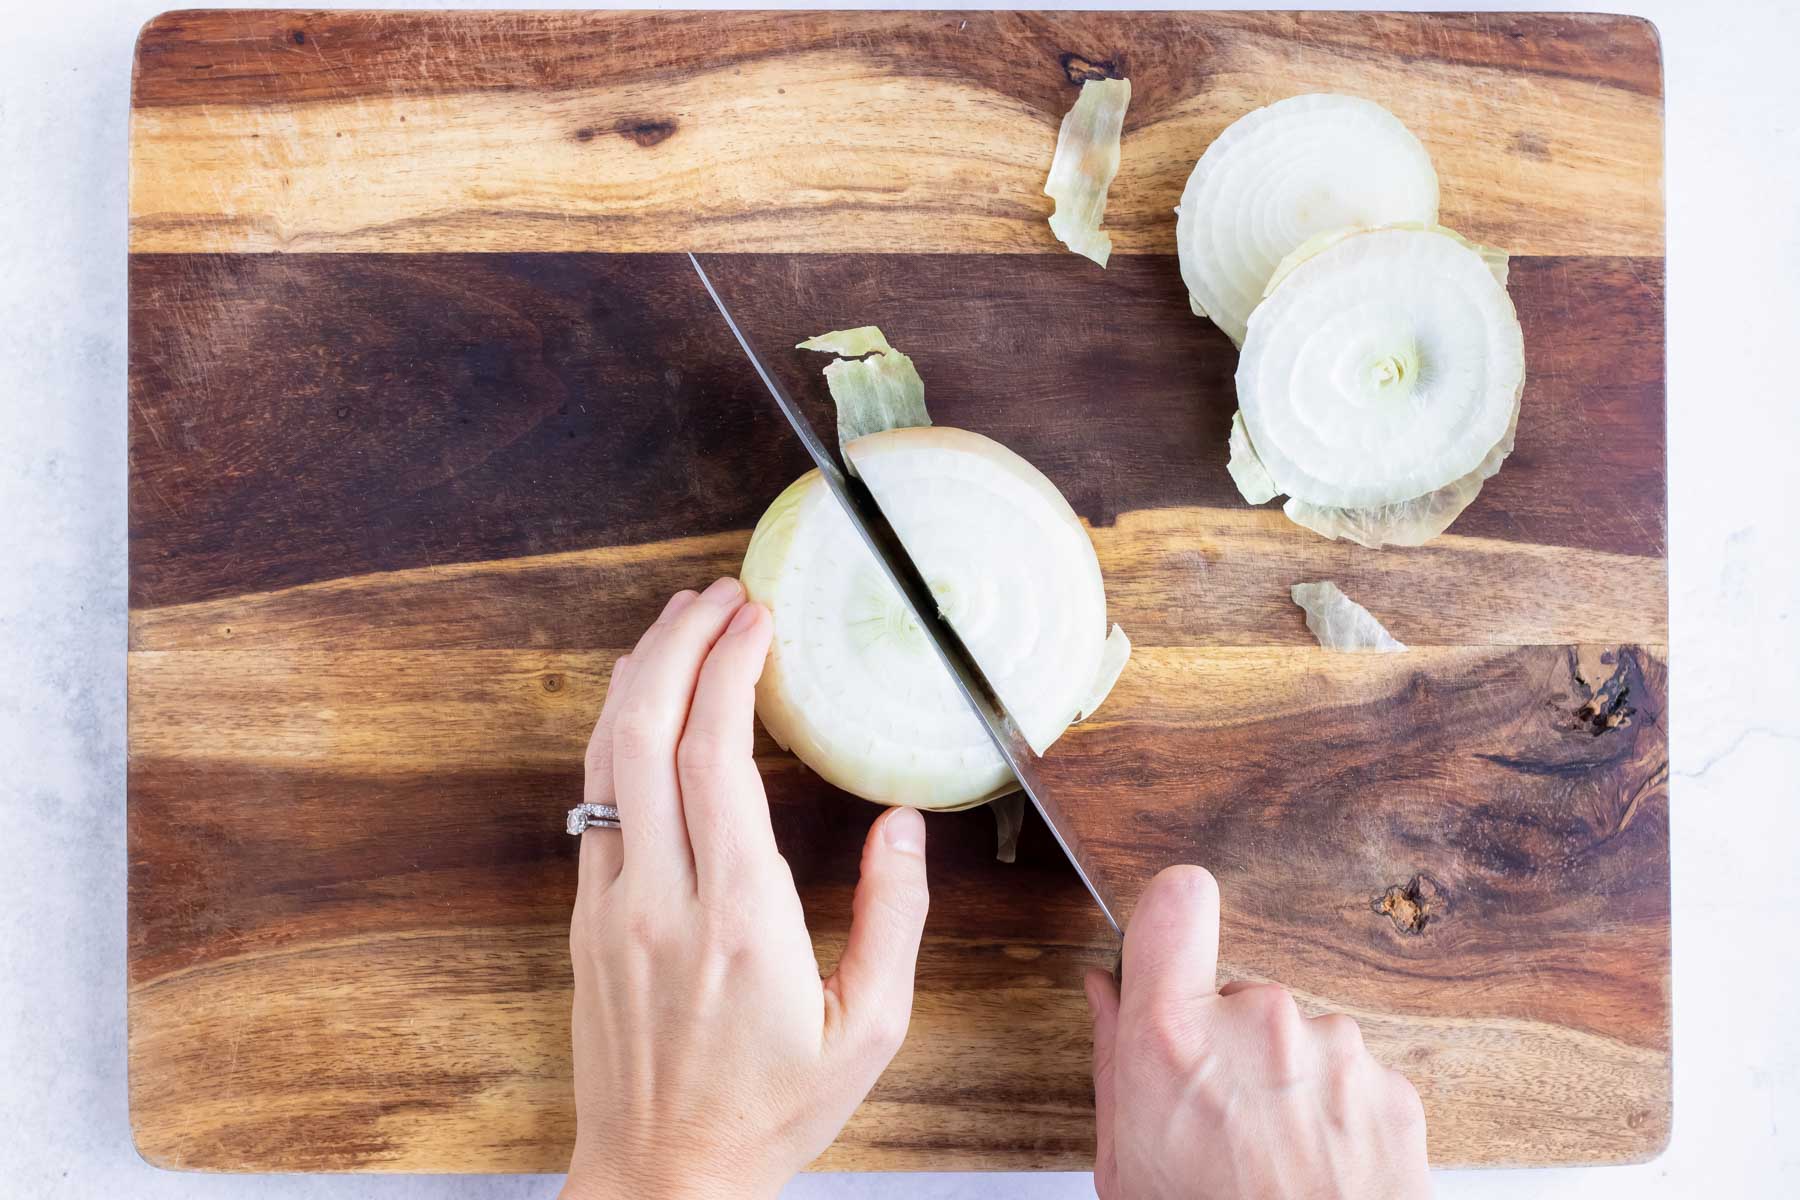 The onion is cut in half on a wooden cutting board and a knife. 